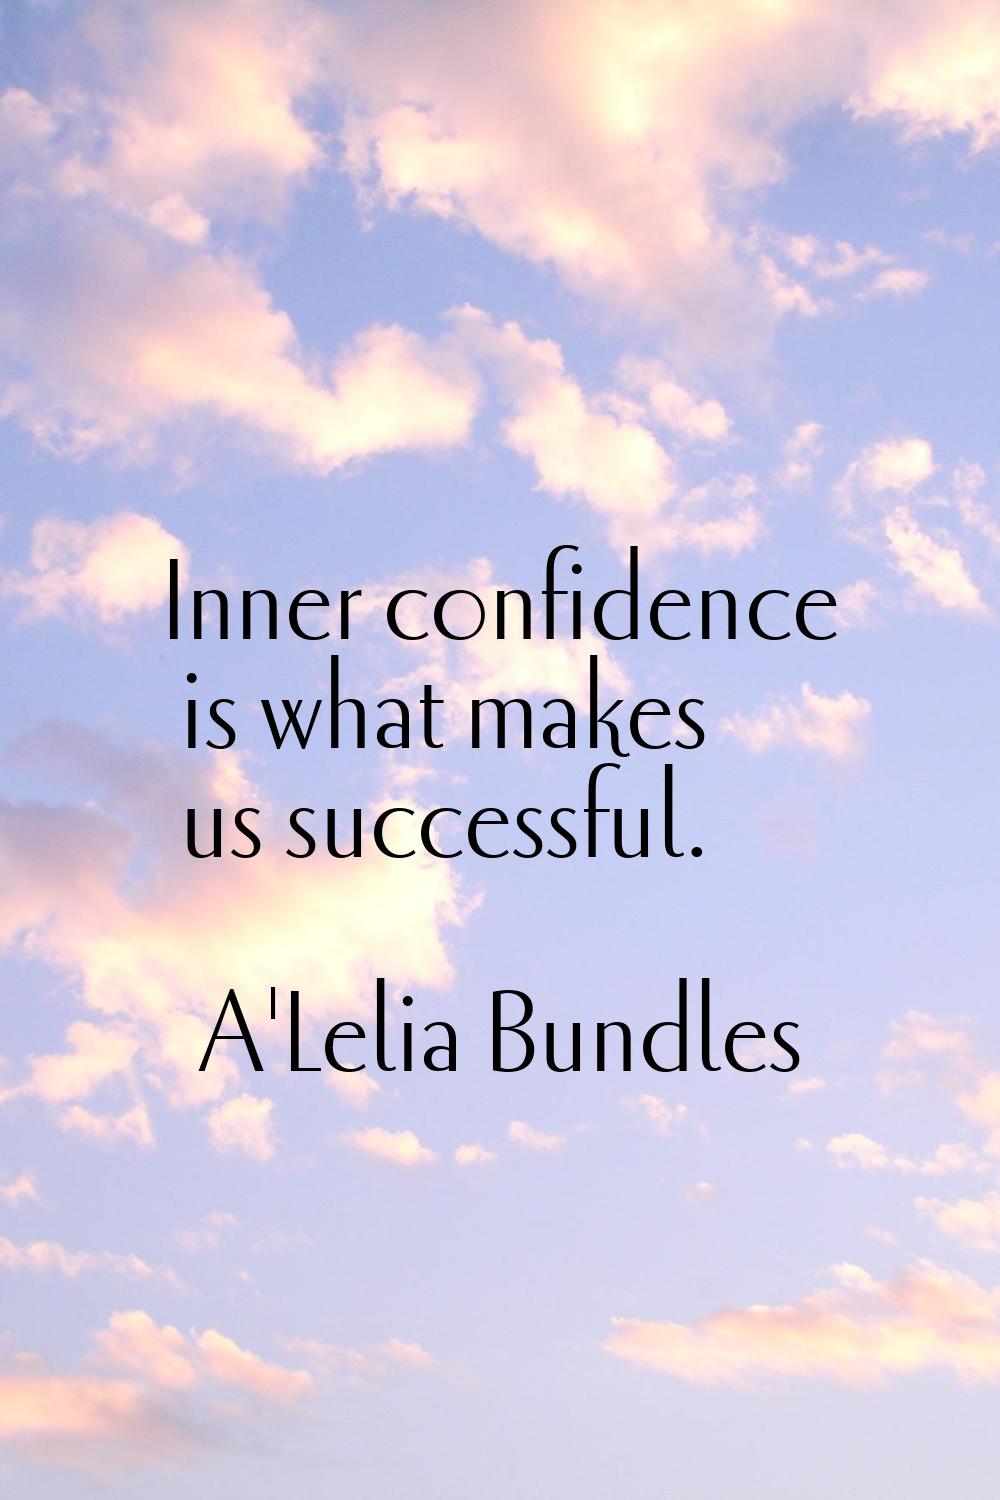 Inner confidence is what makes us successful.